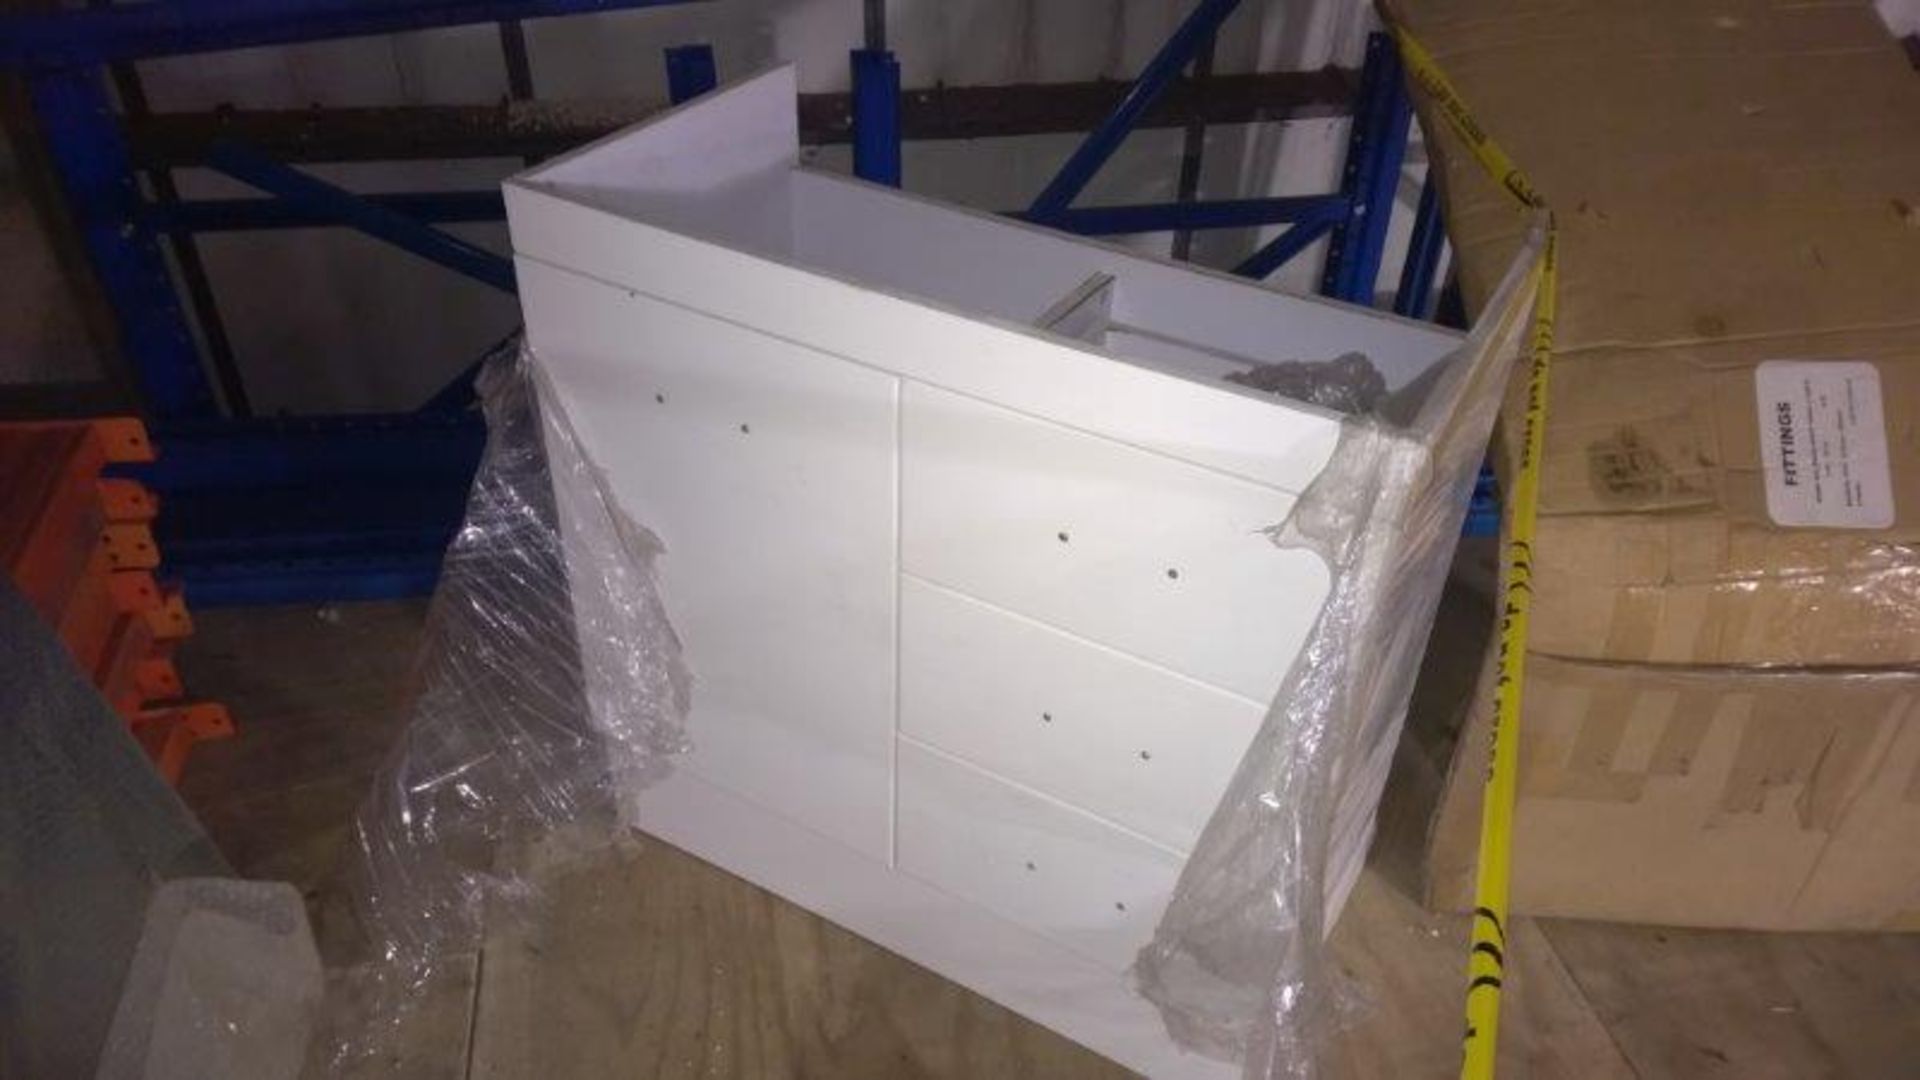 Bathroom vanity unit delivery possible on this item, to anywhere, price extra and quoted